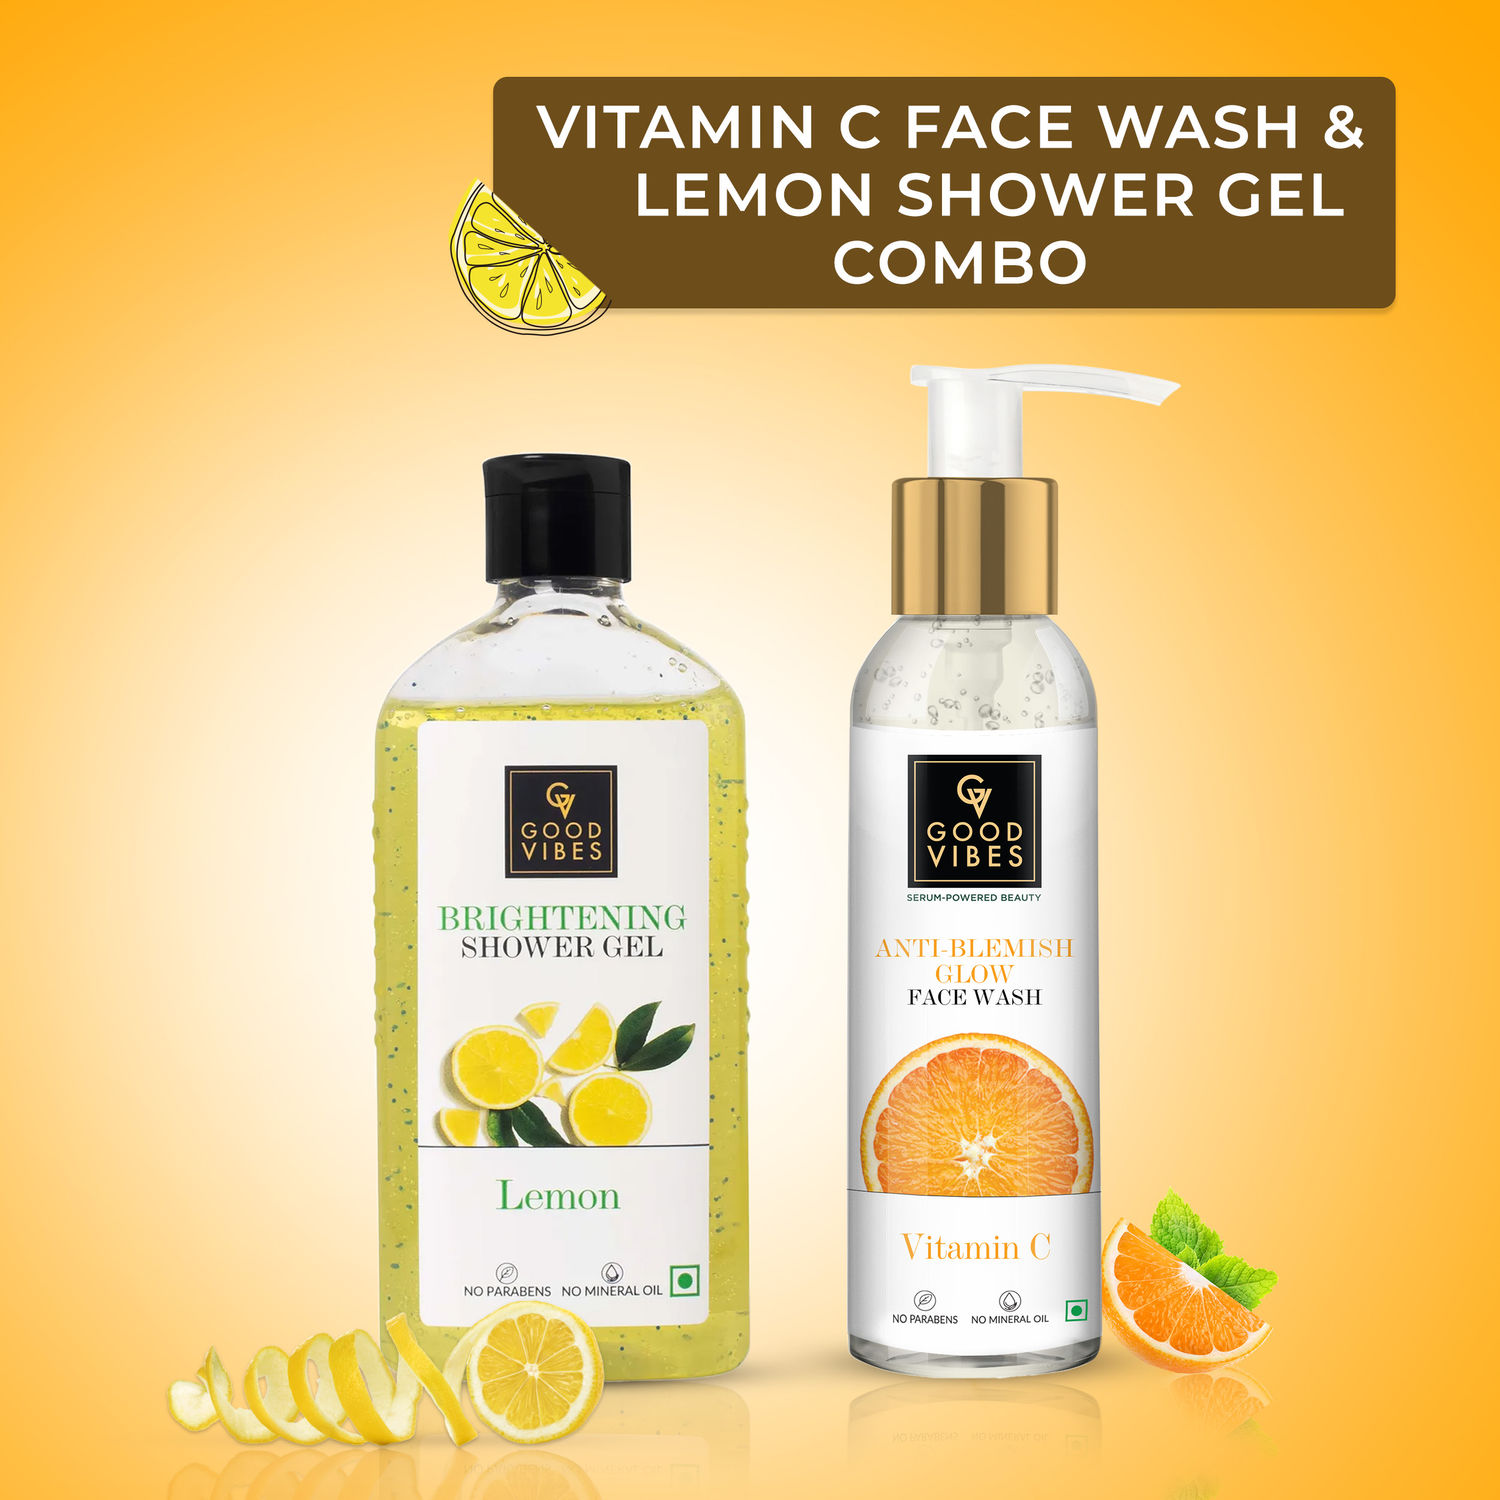 Buy Good Vibes Brighten Up Your Skin Care Routine with Our Vitamin C Face Wash and Lemon Brightening Shower Gel Combo - Purplle